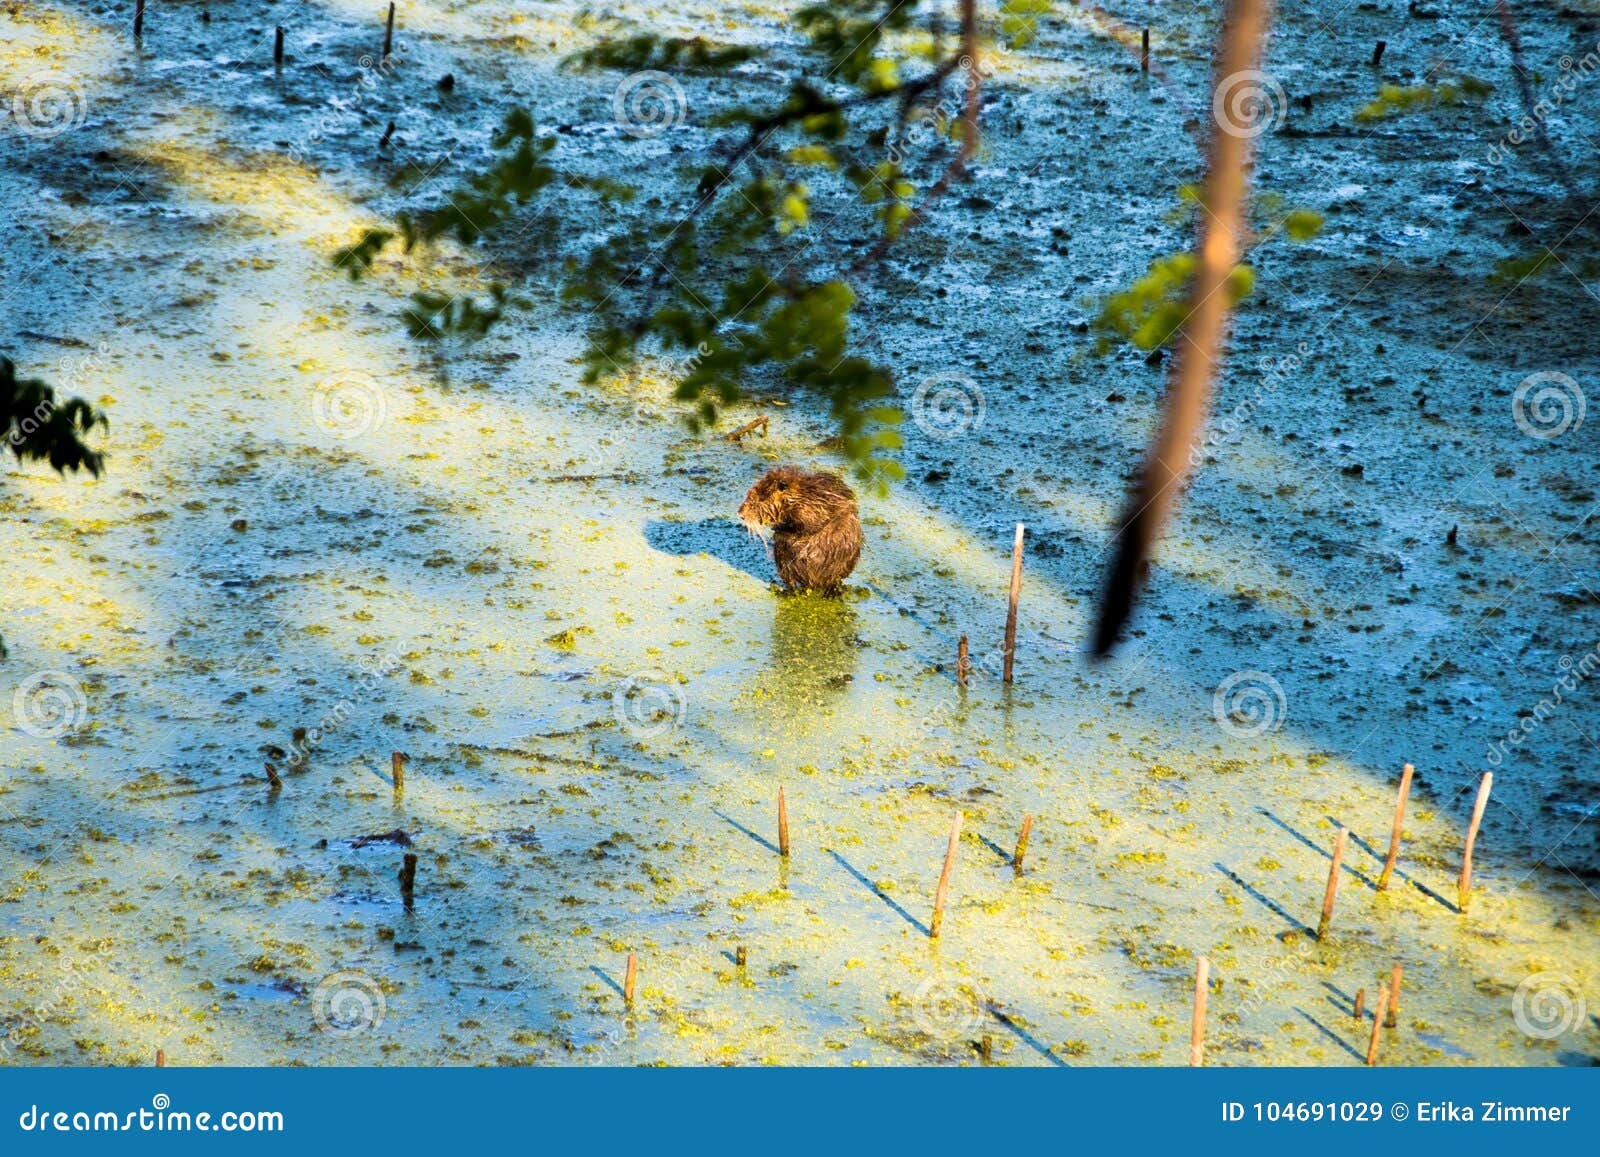 a beaver in swamp landscape in puerto madero, nature and water